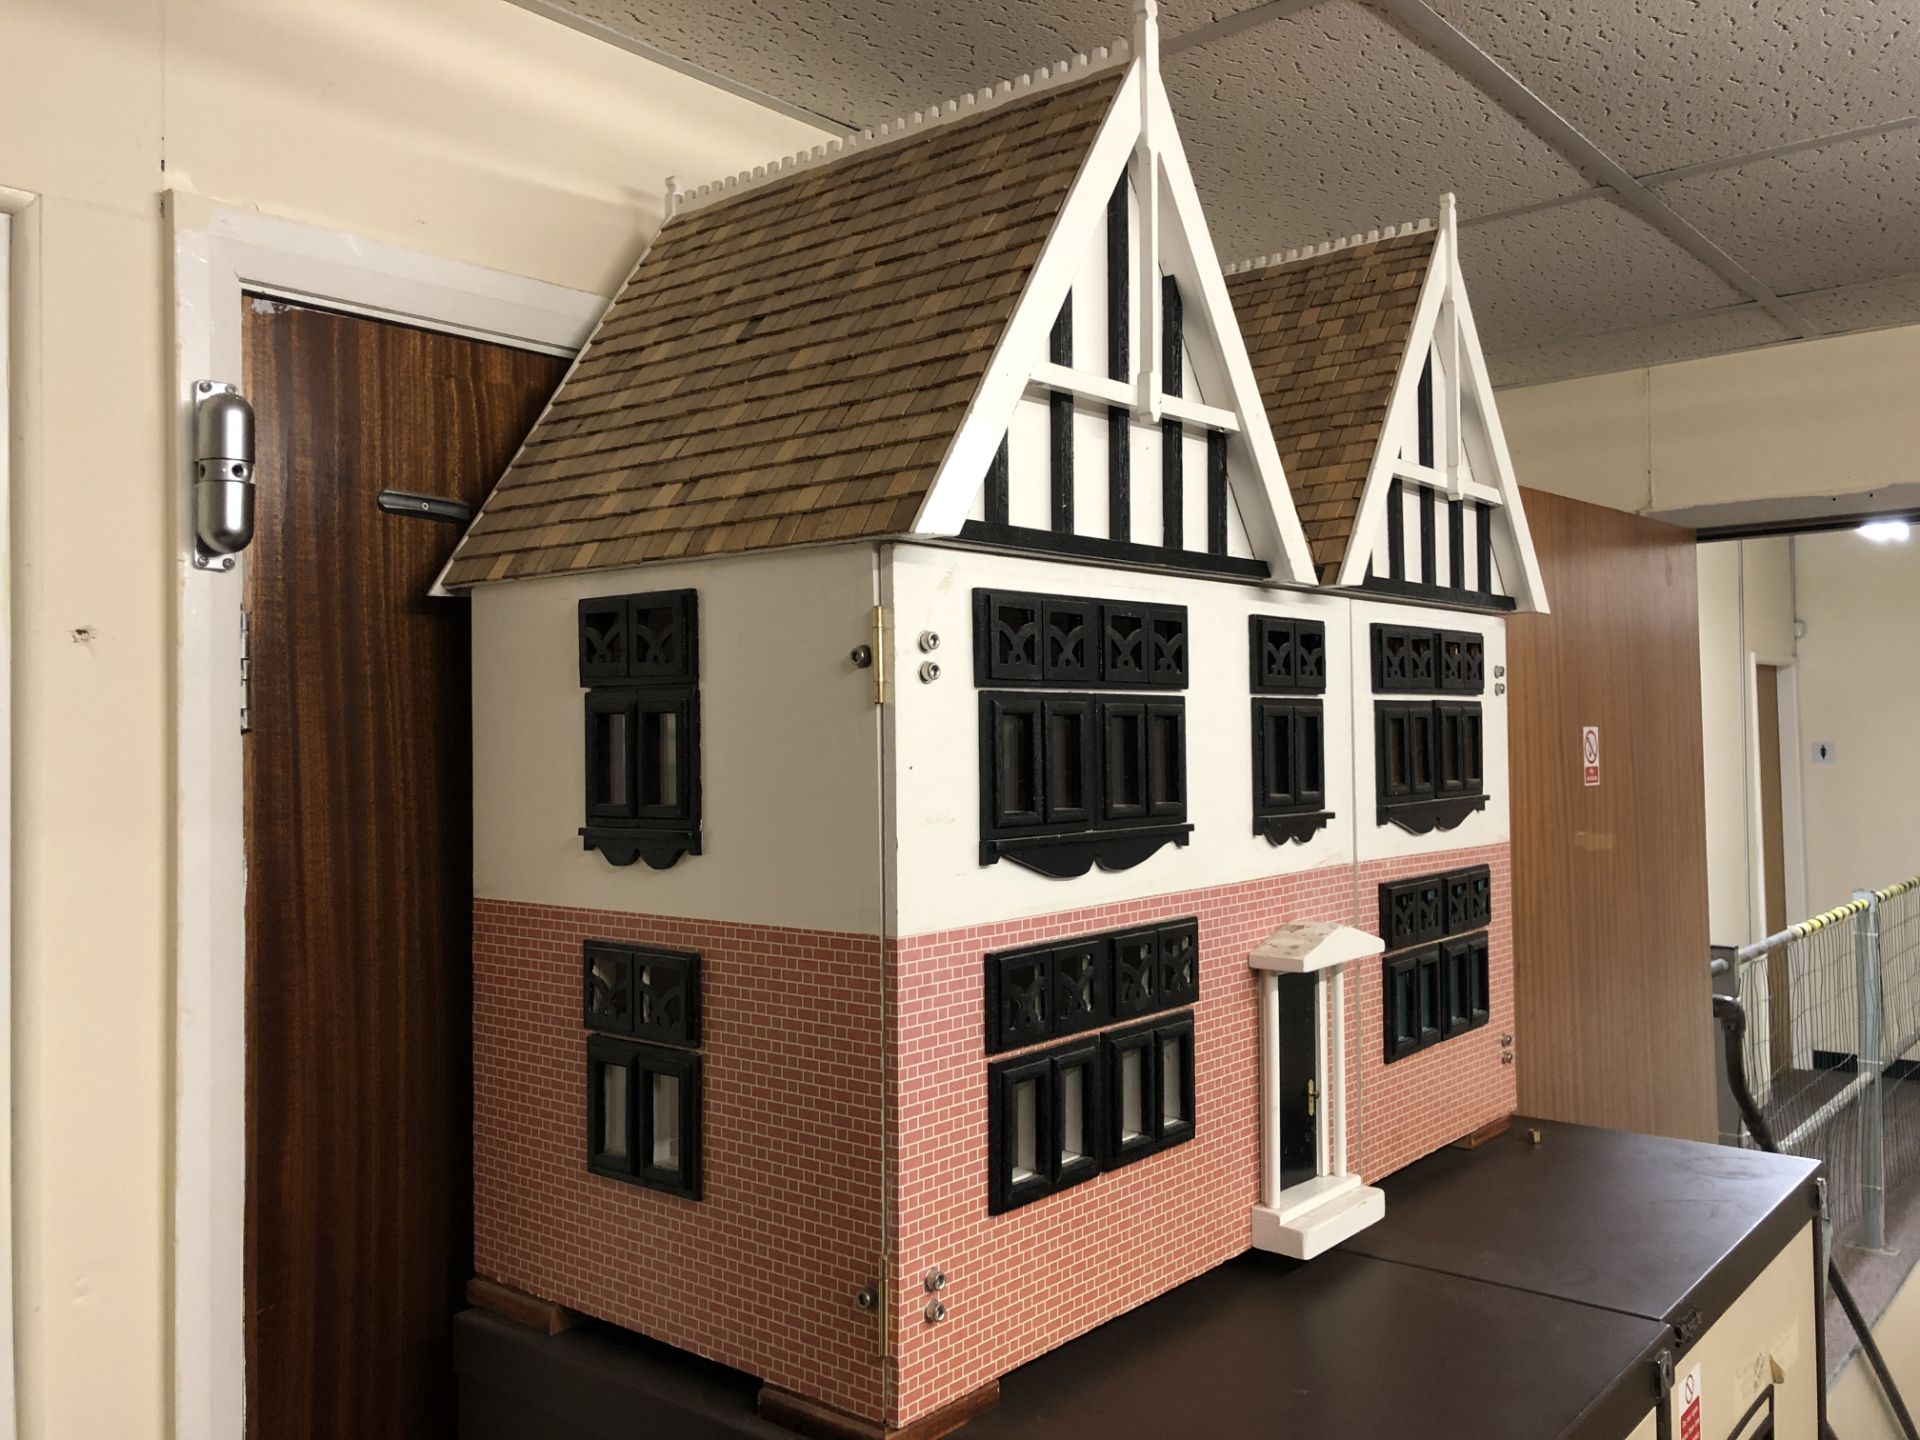 Wooden Dolls House - Image 2 of 7